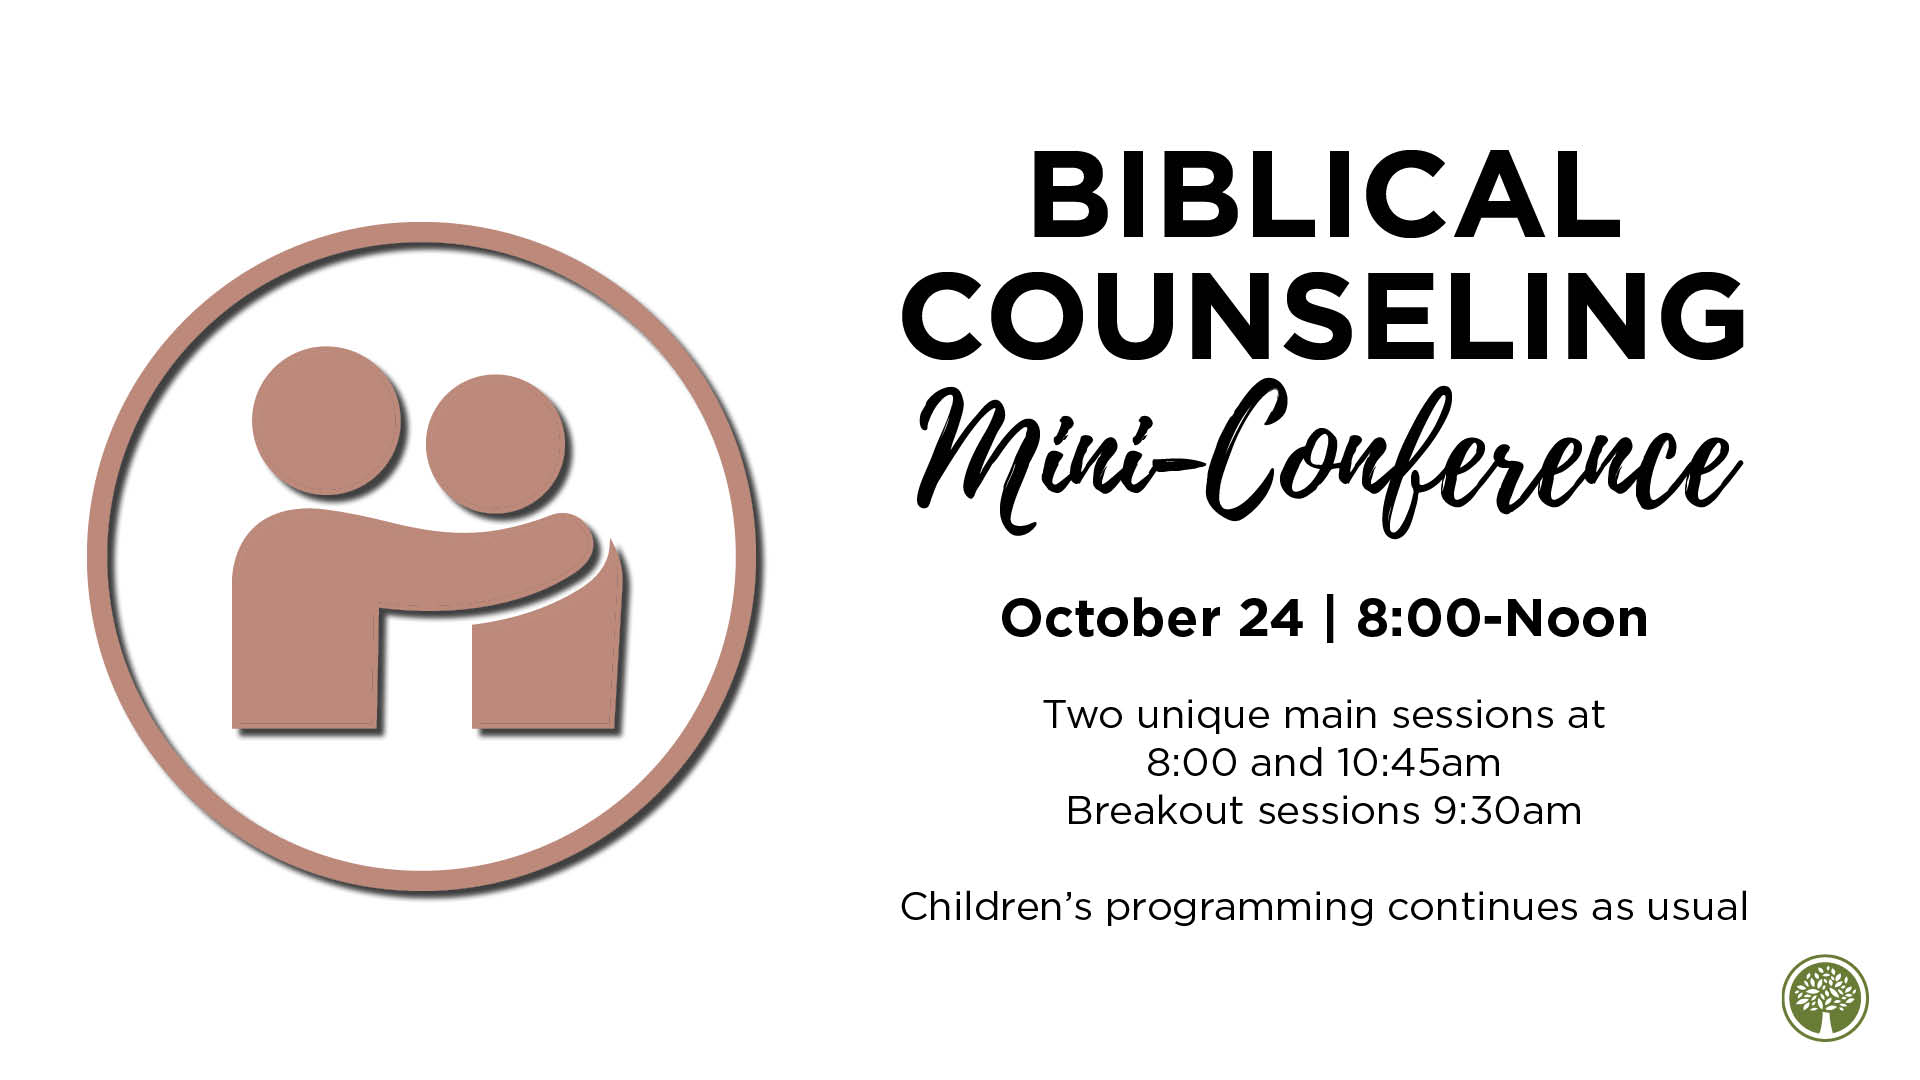 Biblical Counseling Through Daily Life (For Women)